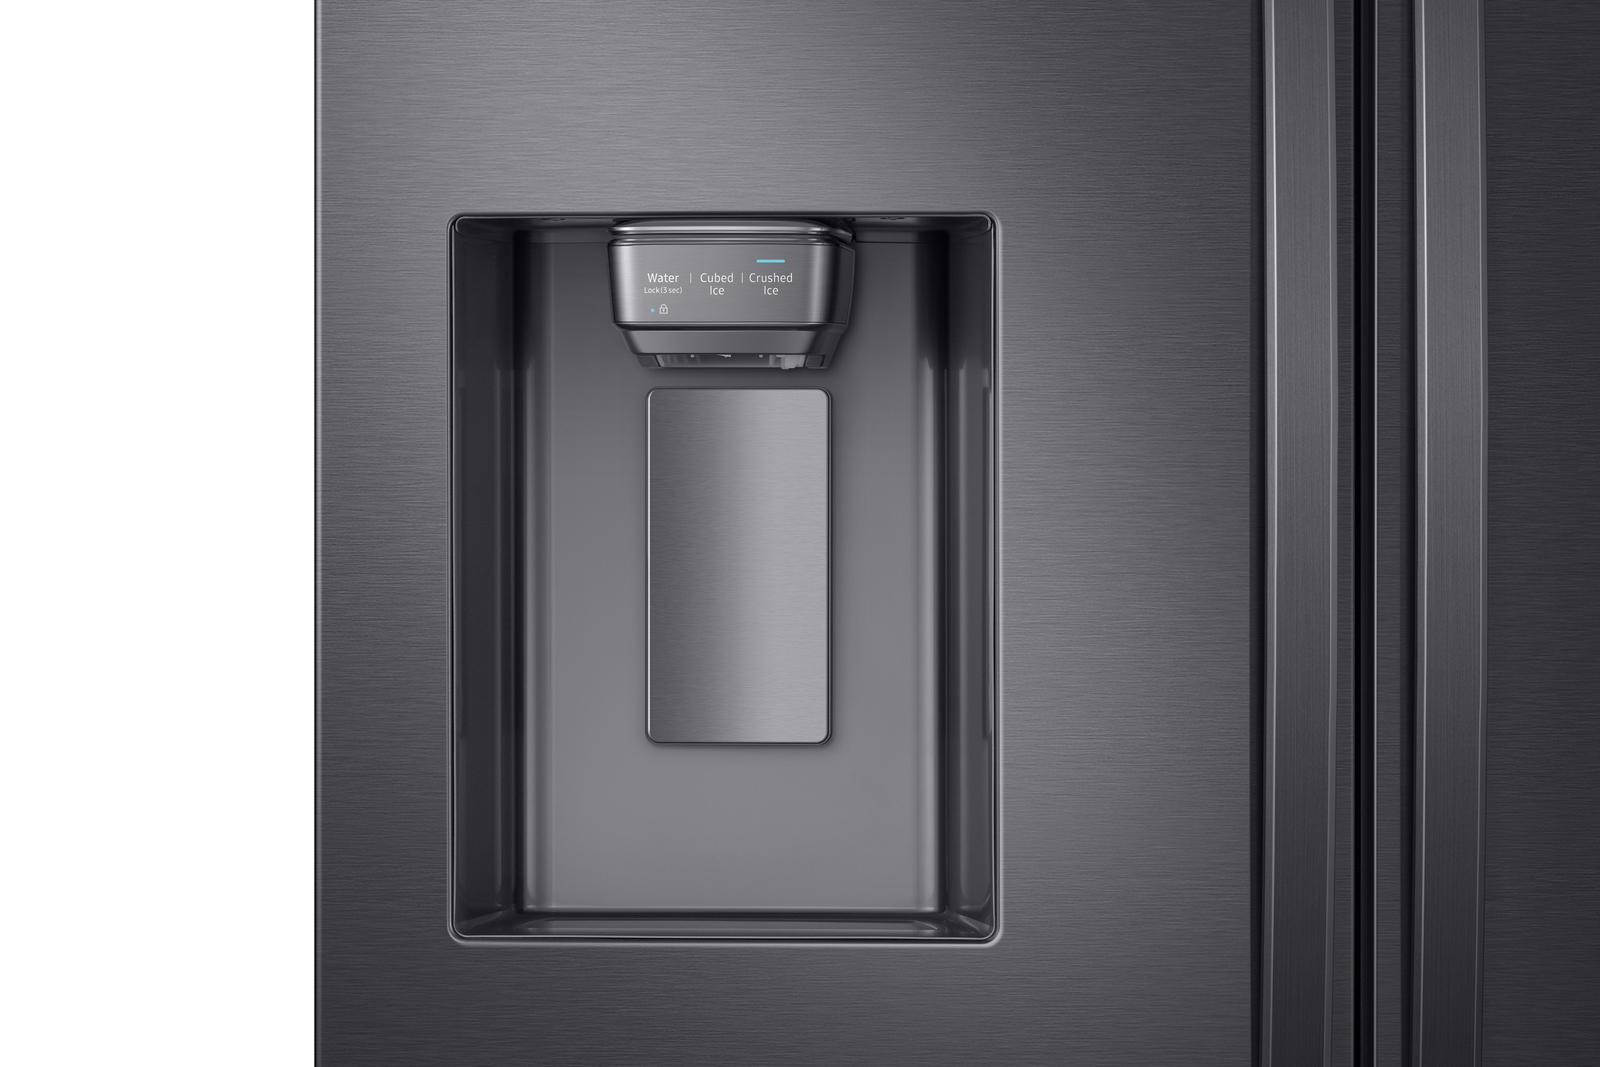 Thumbnail image of 22 cu. ft. 4-Door French Door, Counter Depth Refrigerator with 21.5&rdquo; Touch Screen Family Hub&trade; in Black Stainless Steel